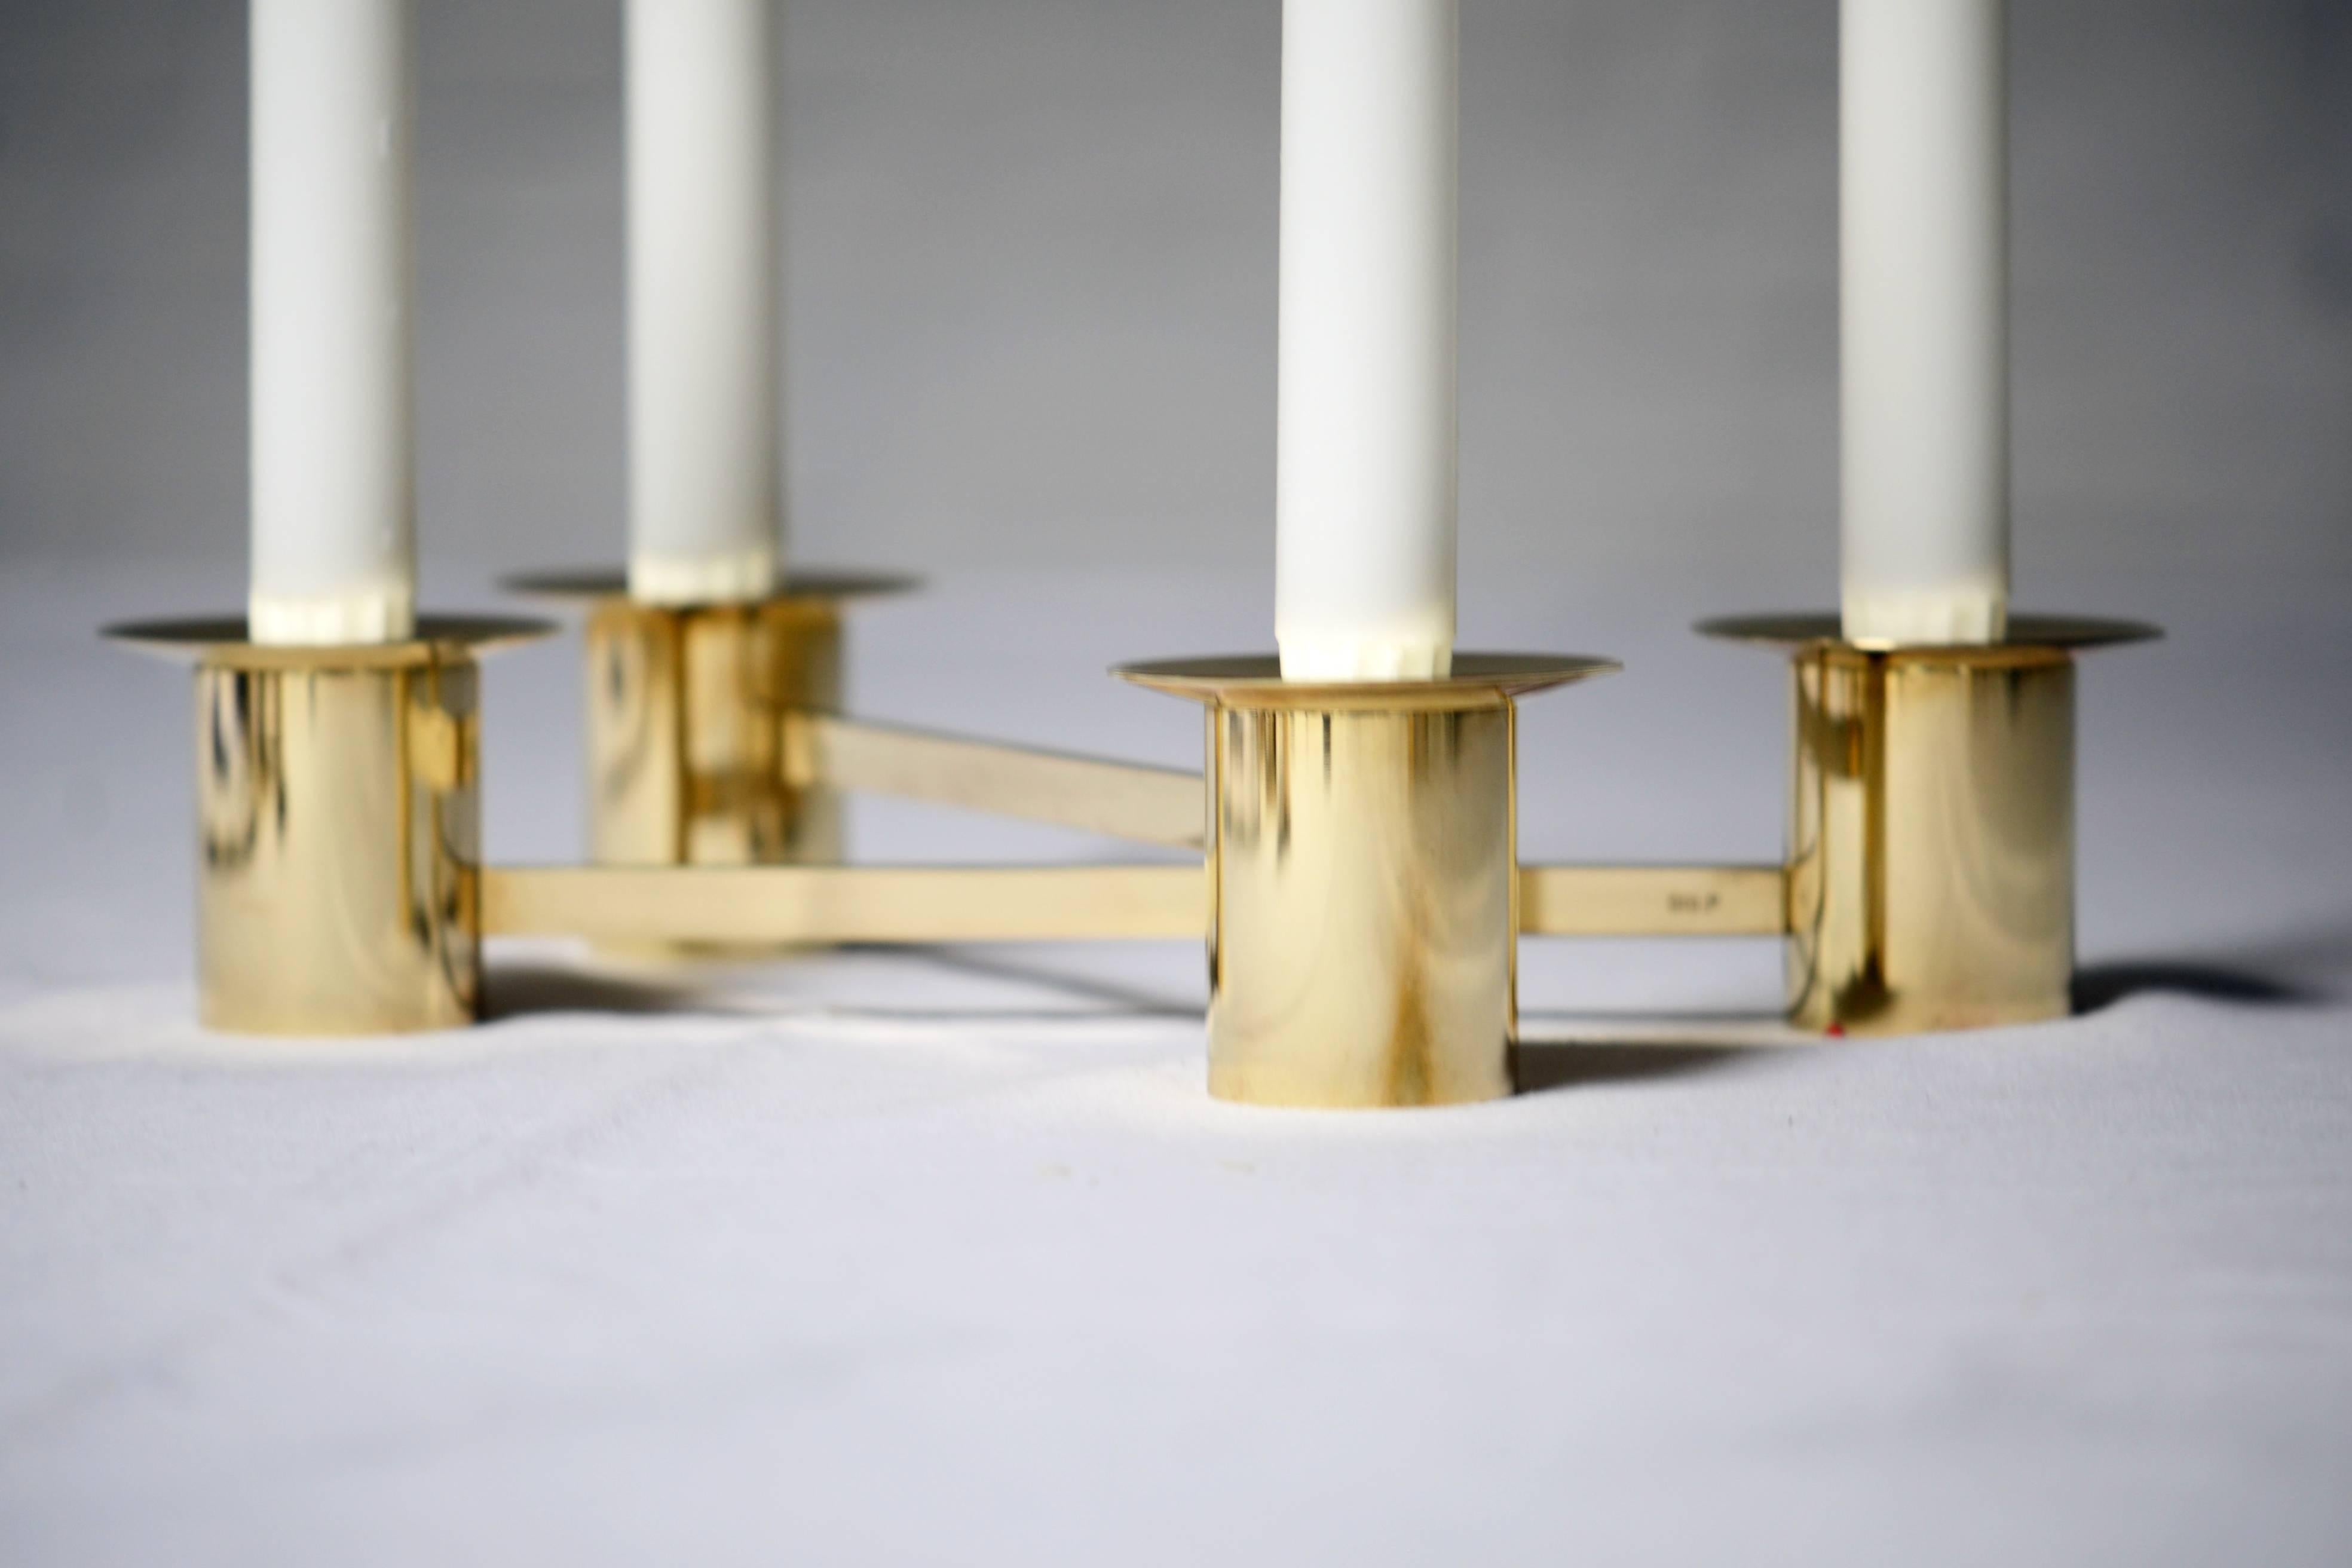 Pair of brass candlesticks.

Sigurd Persson, (1914-2003).
Sigurd Persson began as a silversmith, but over a long path constantly tried new genres and among other things, worked as a glass artist, designer and sculptor. During the 1950s-1960s